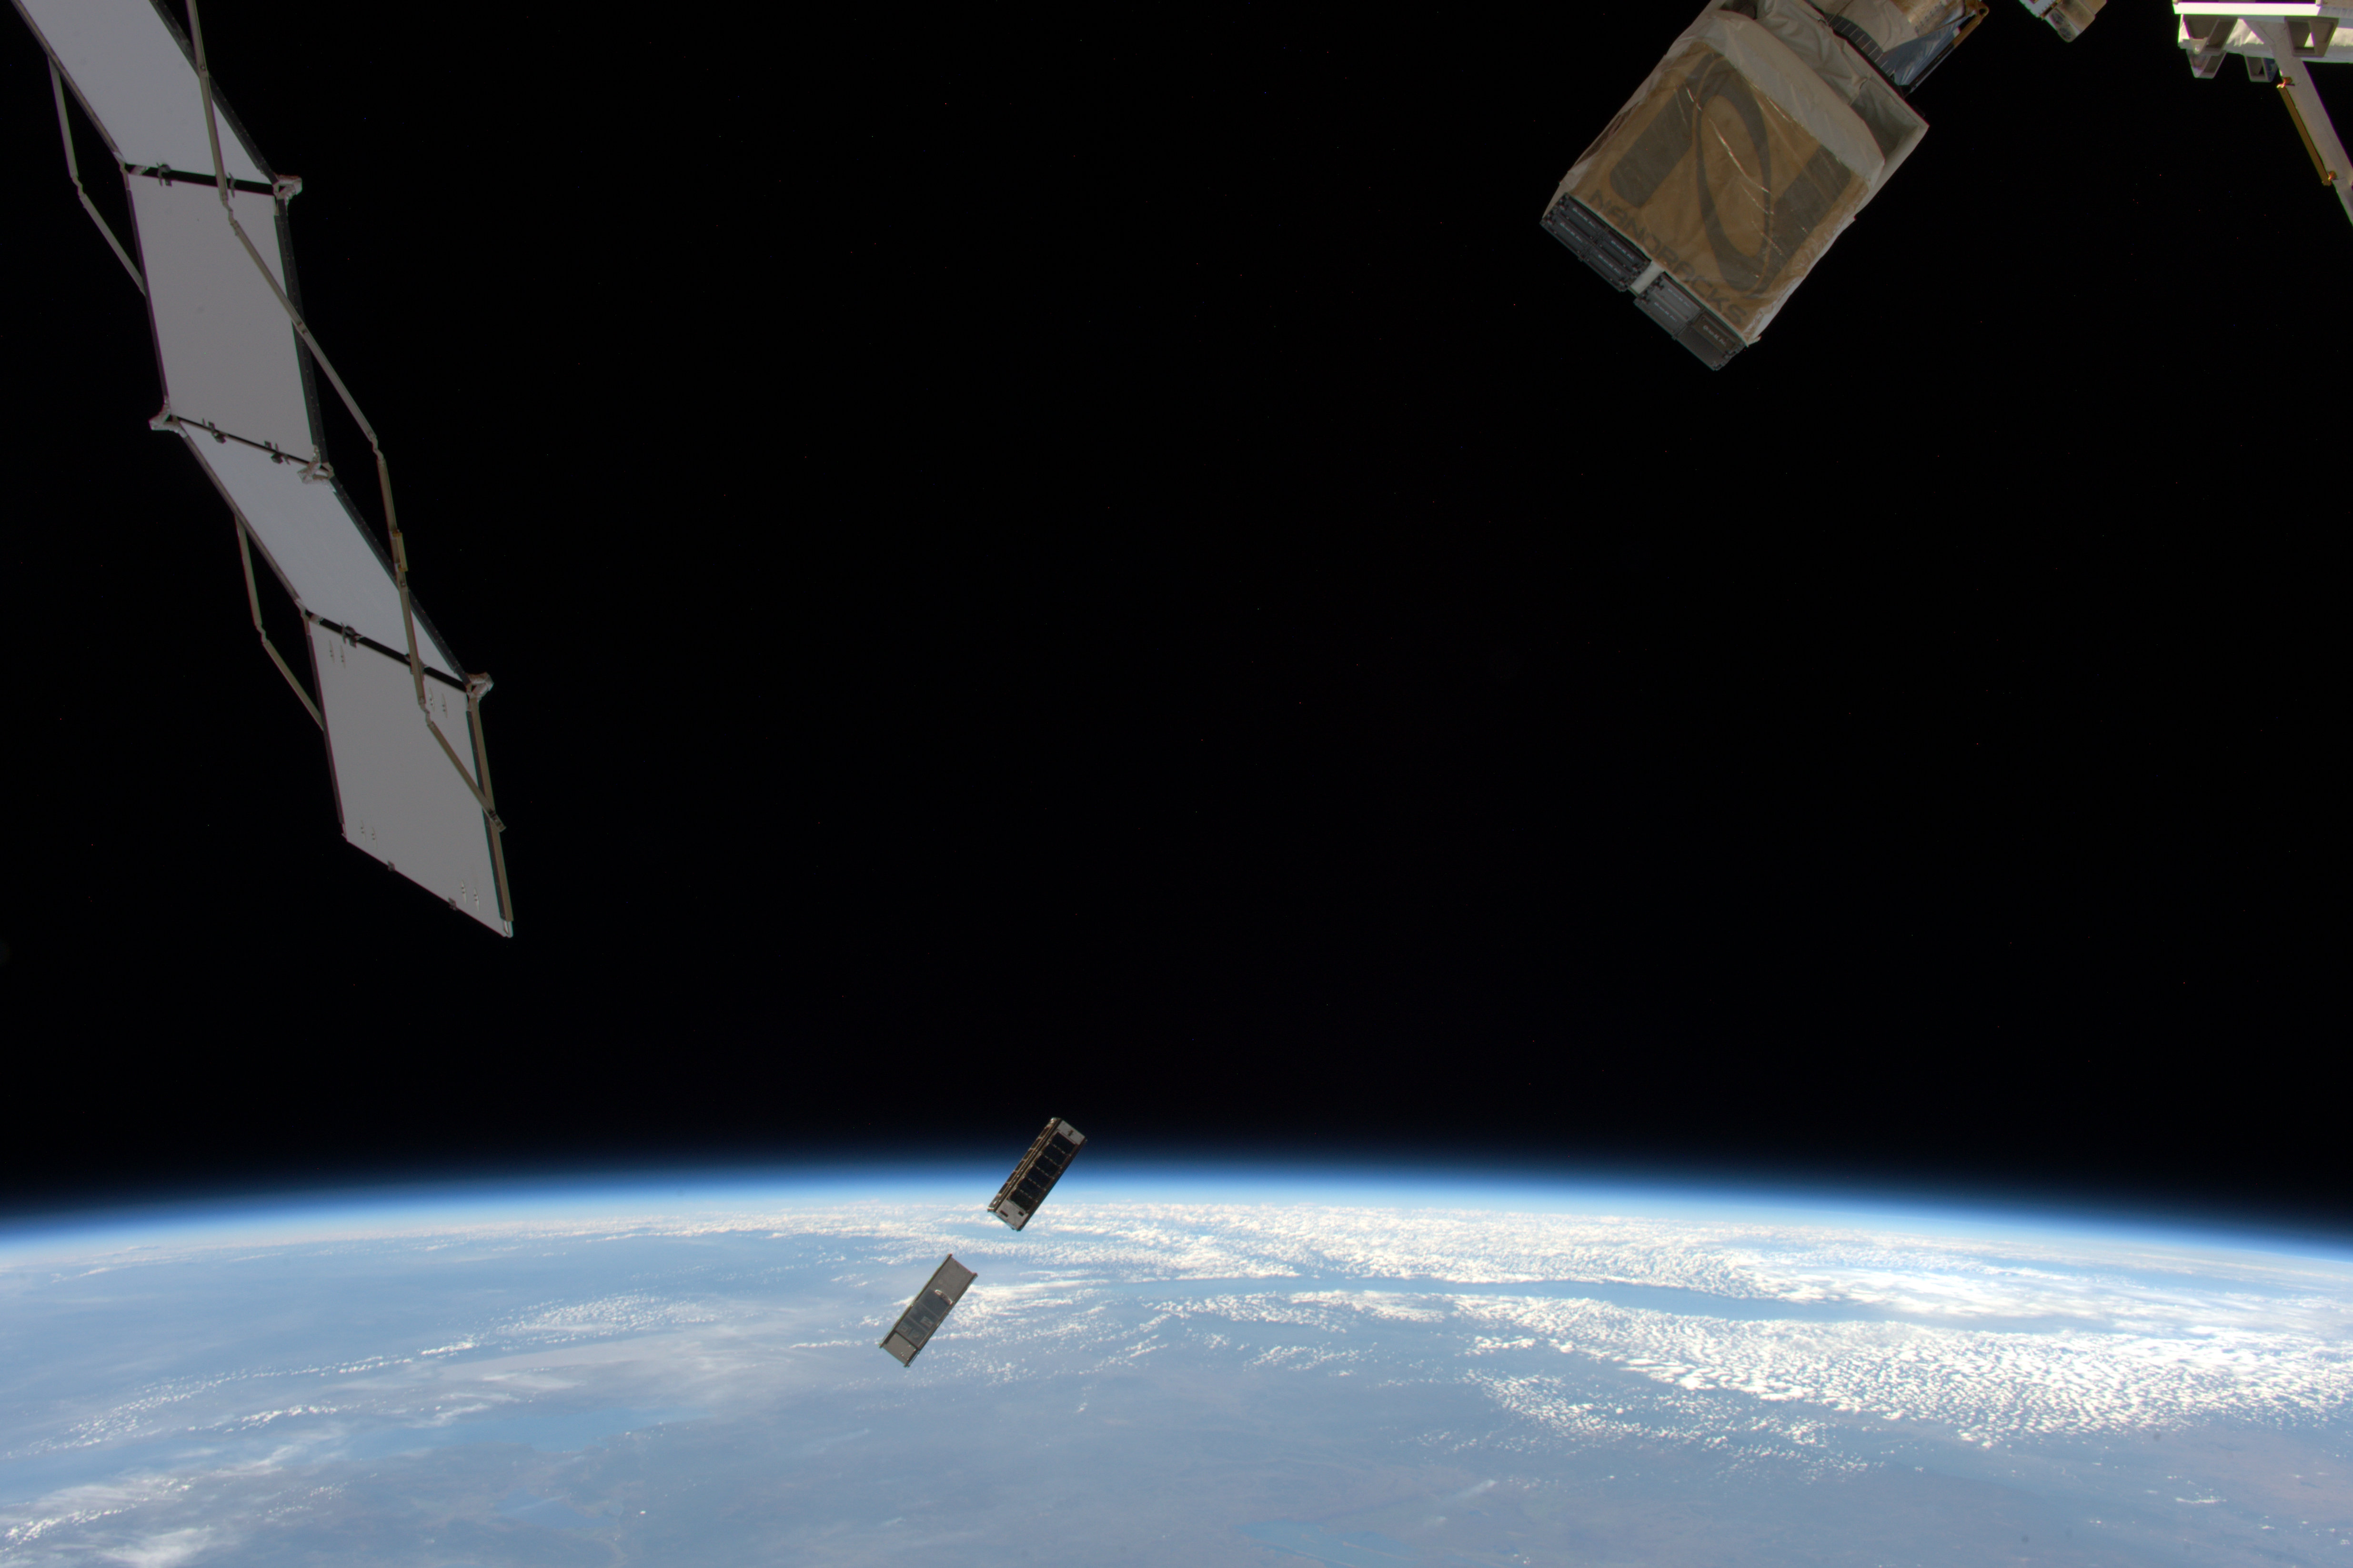 Astronaut Tim Peake on board the International Space Station captured this image of a CubeSat deployment on May 16, 2016.